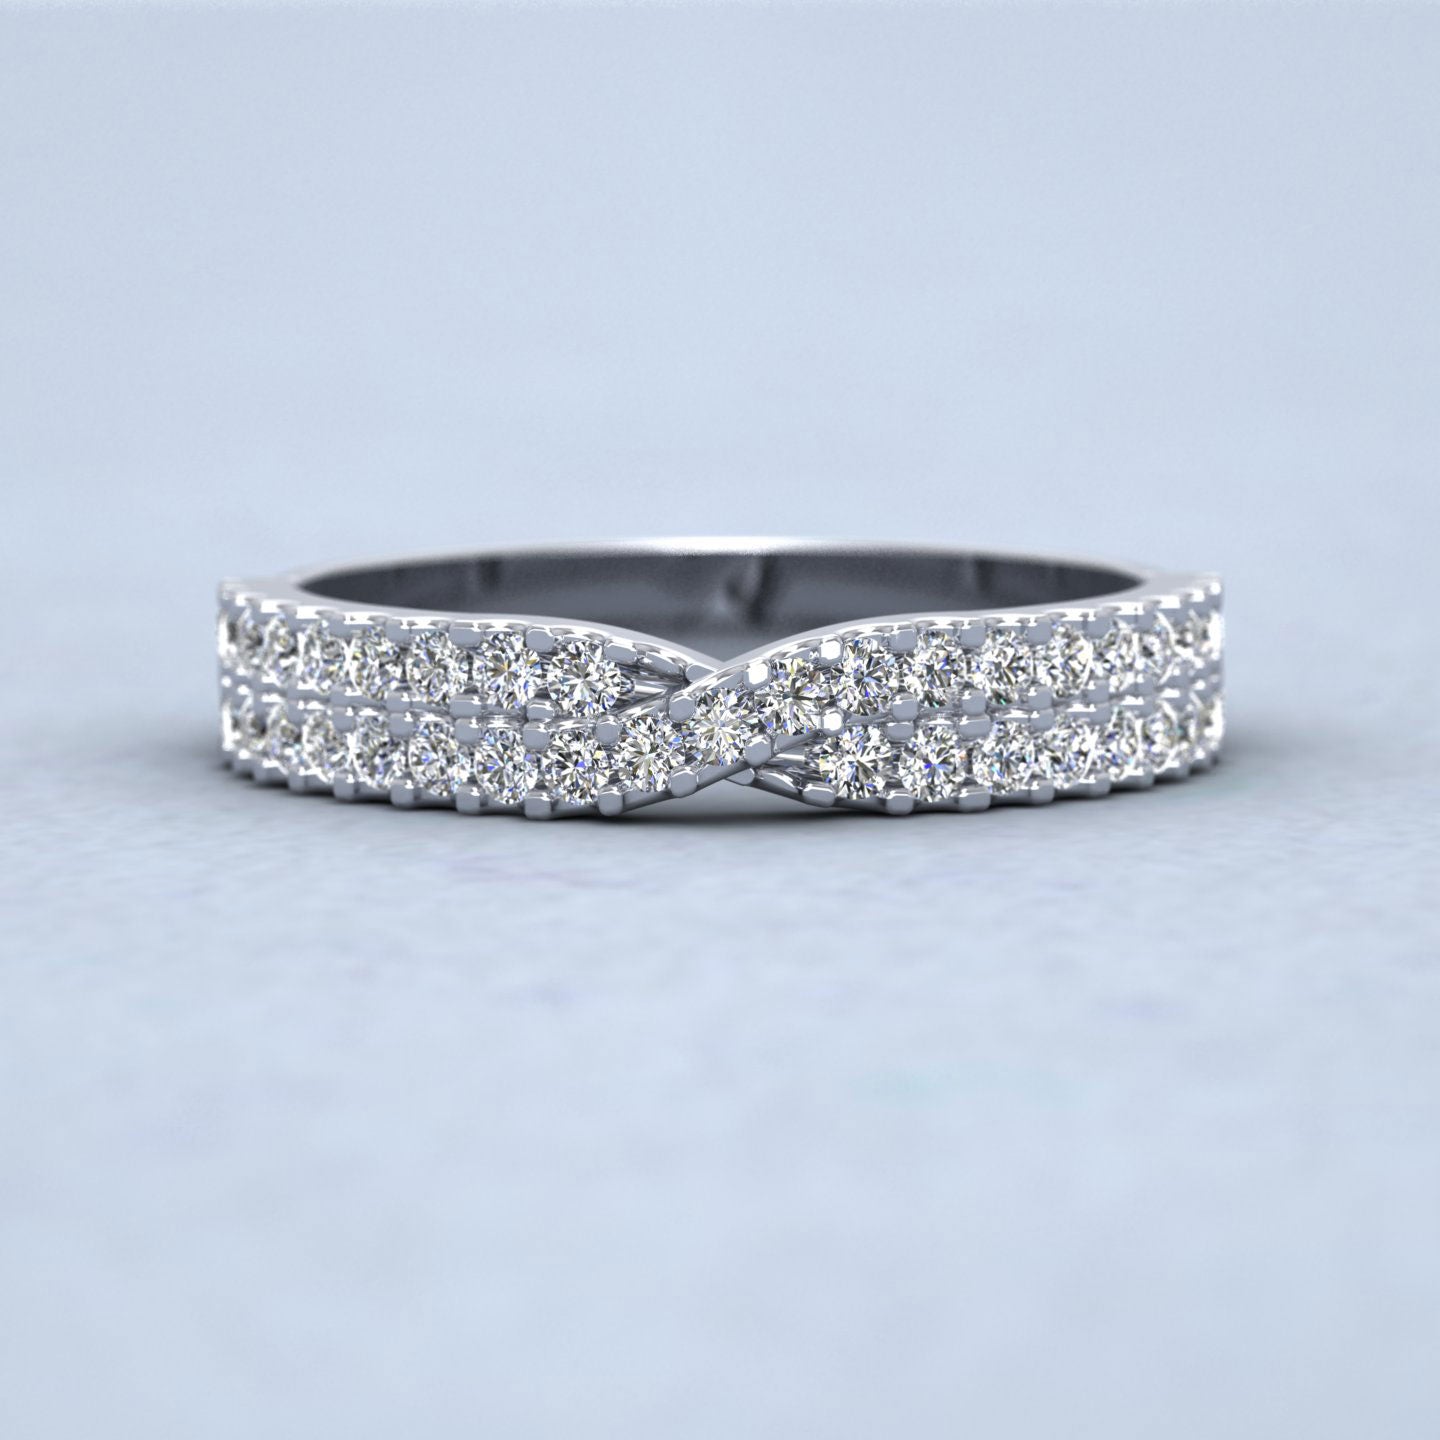 Crossover Diamond Claw Set Wedding Ring In 950 Platinum 3.5mm Wide